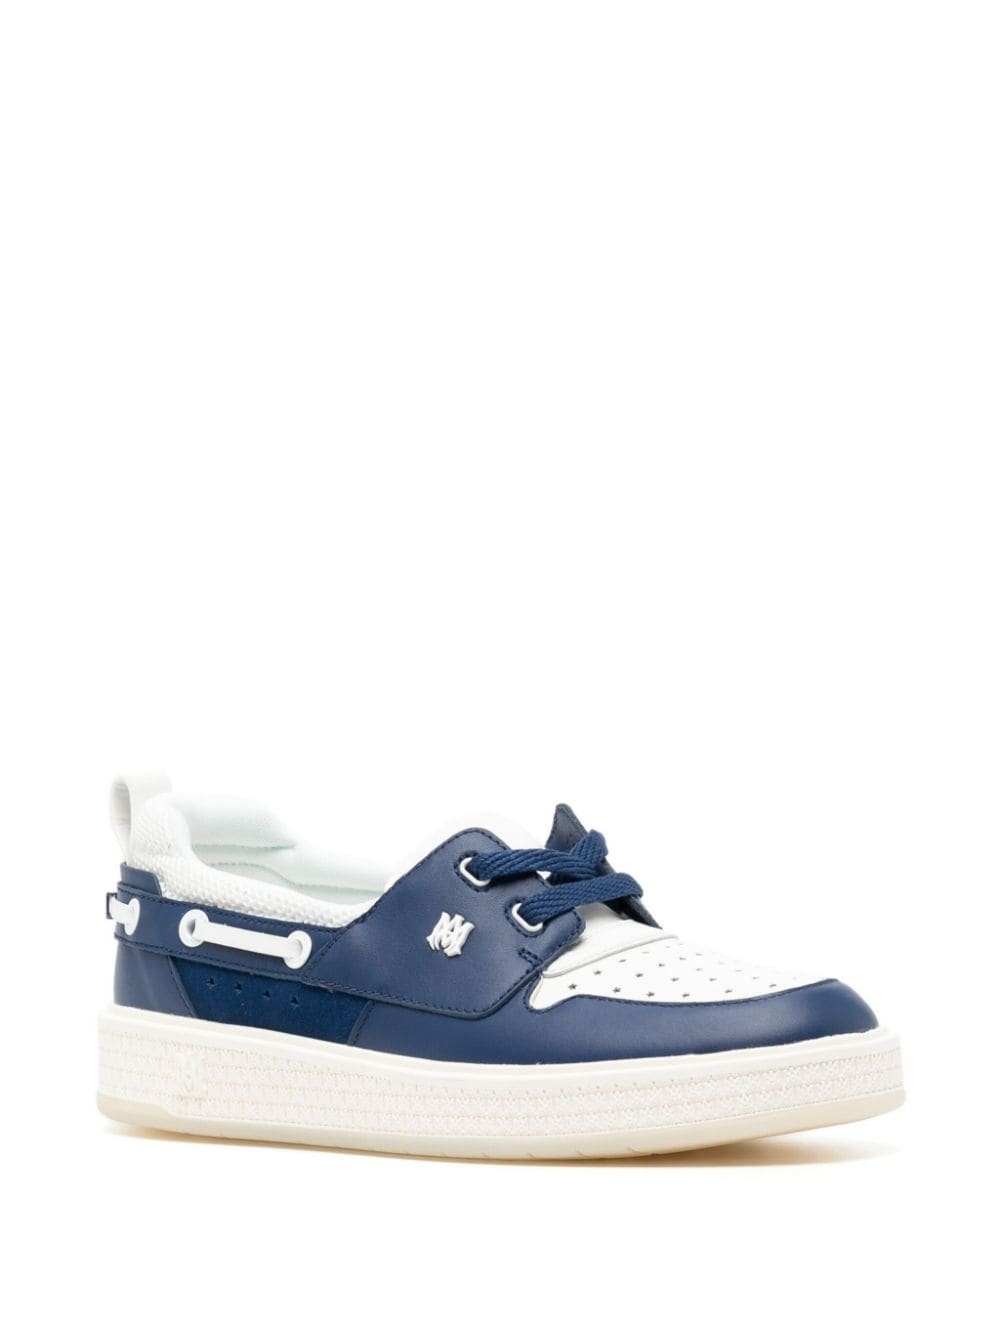 MA panelled boat shoes - 2